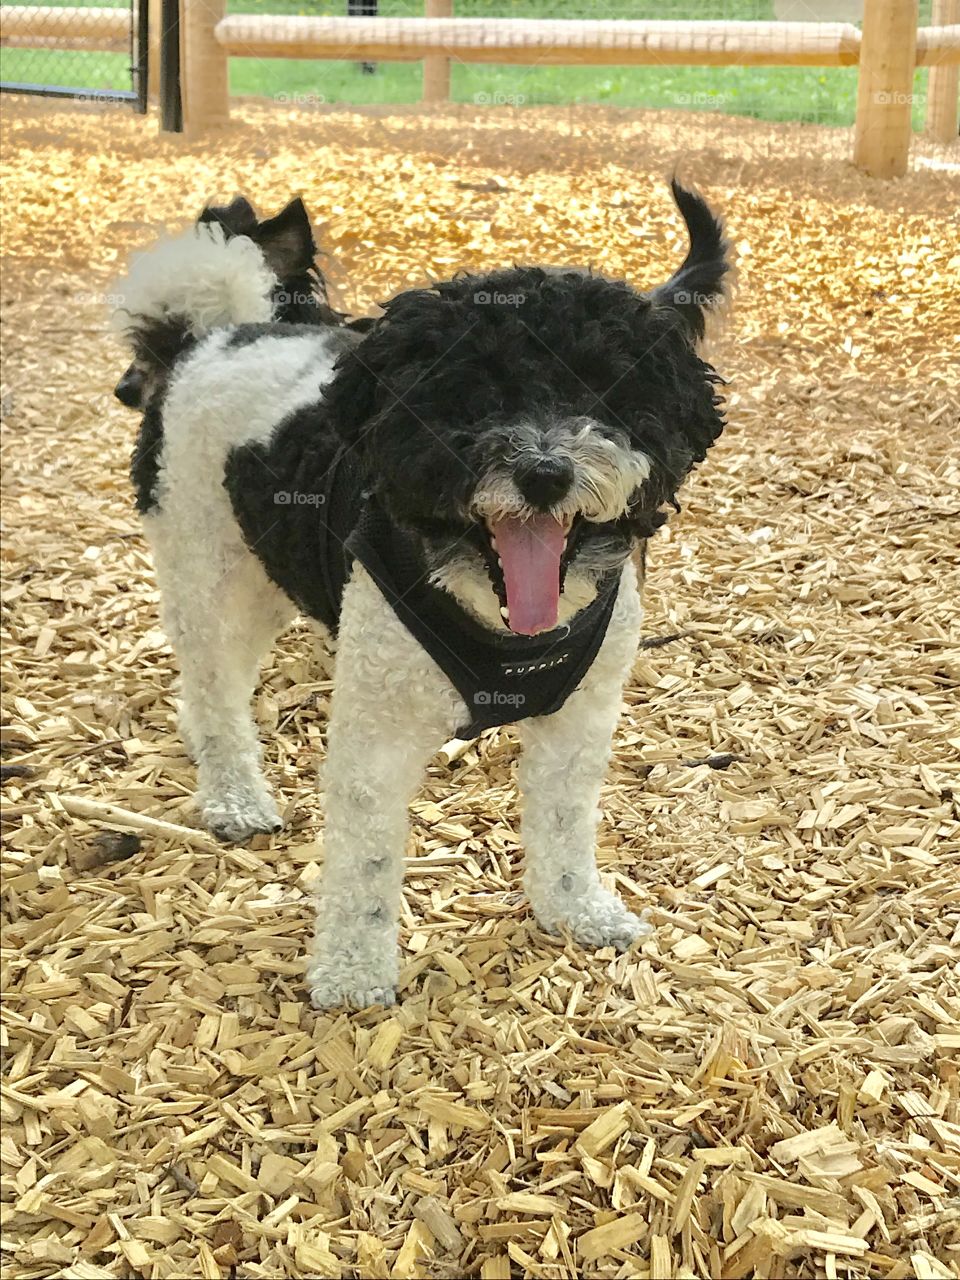 Mike is happy to be at the park